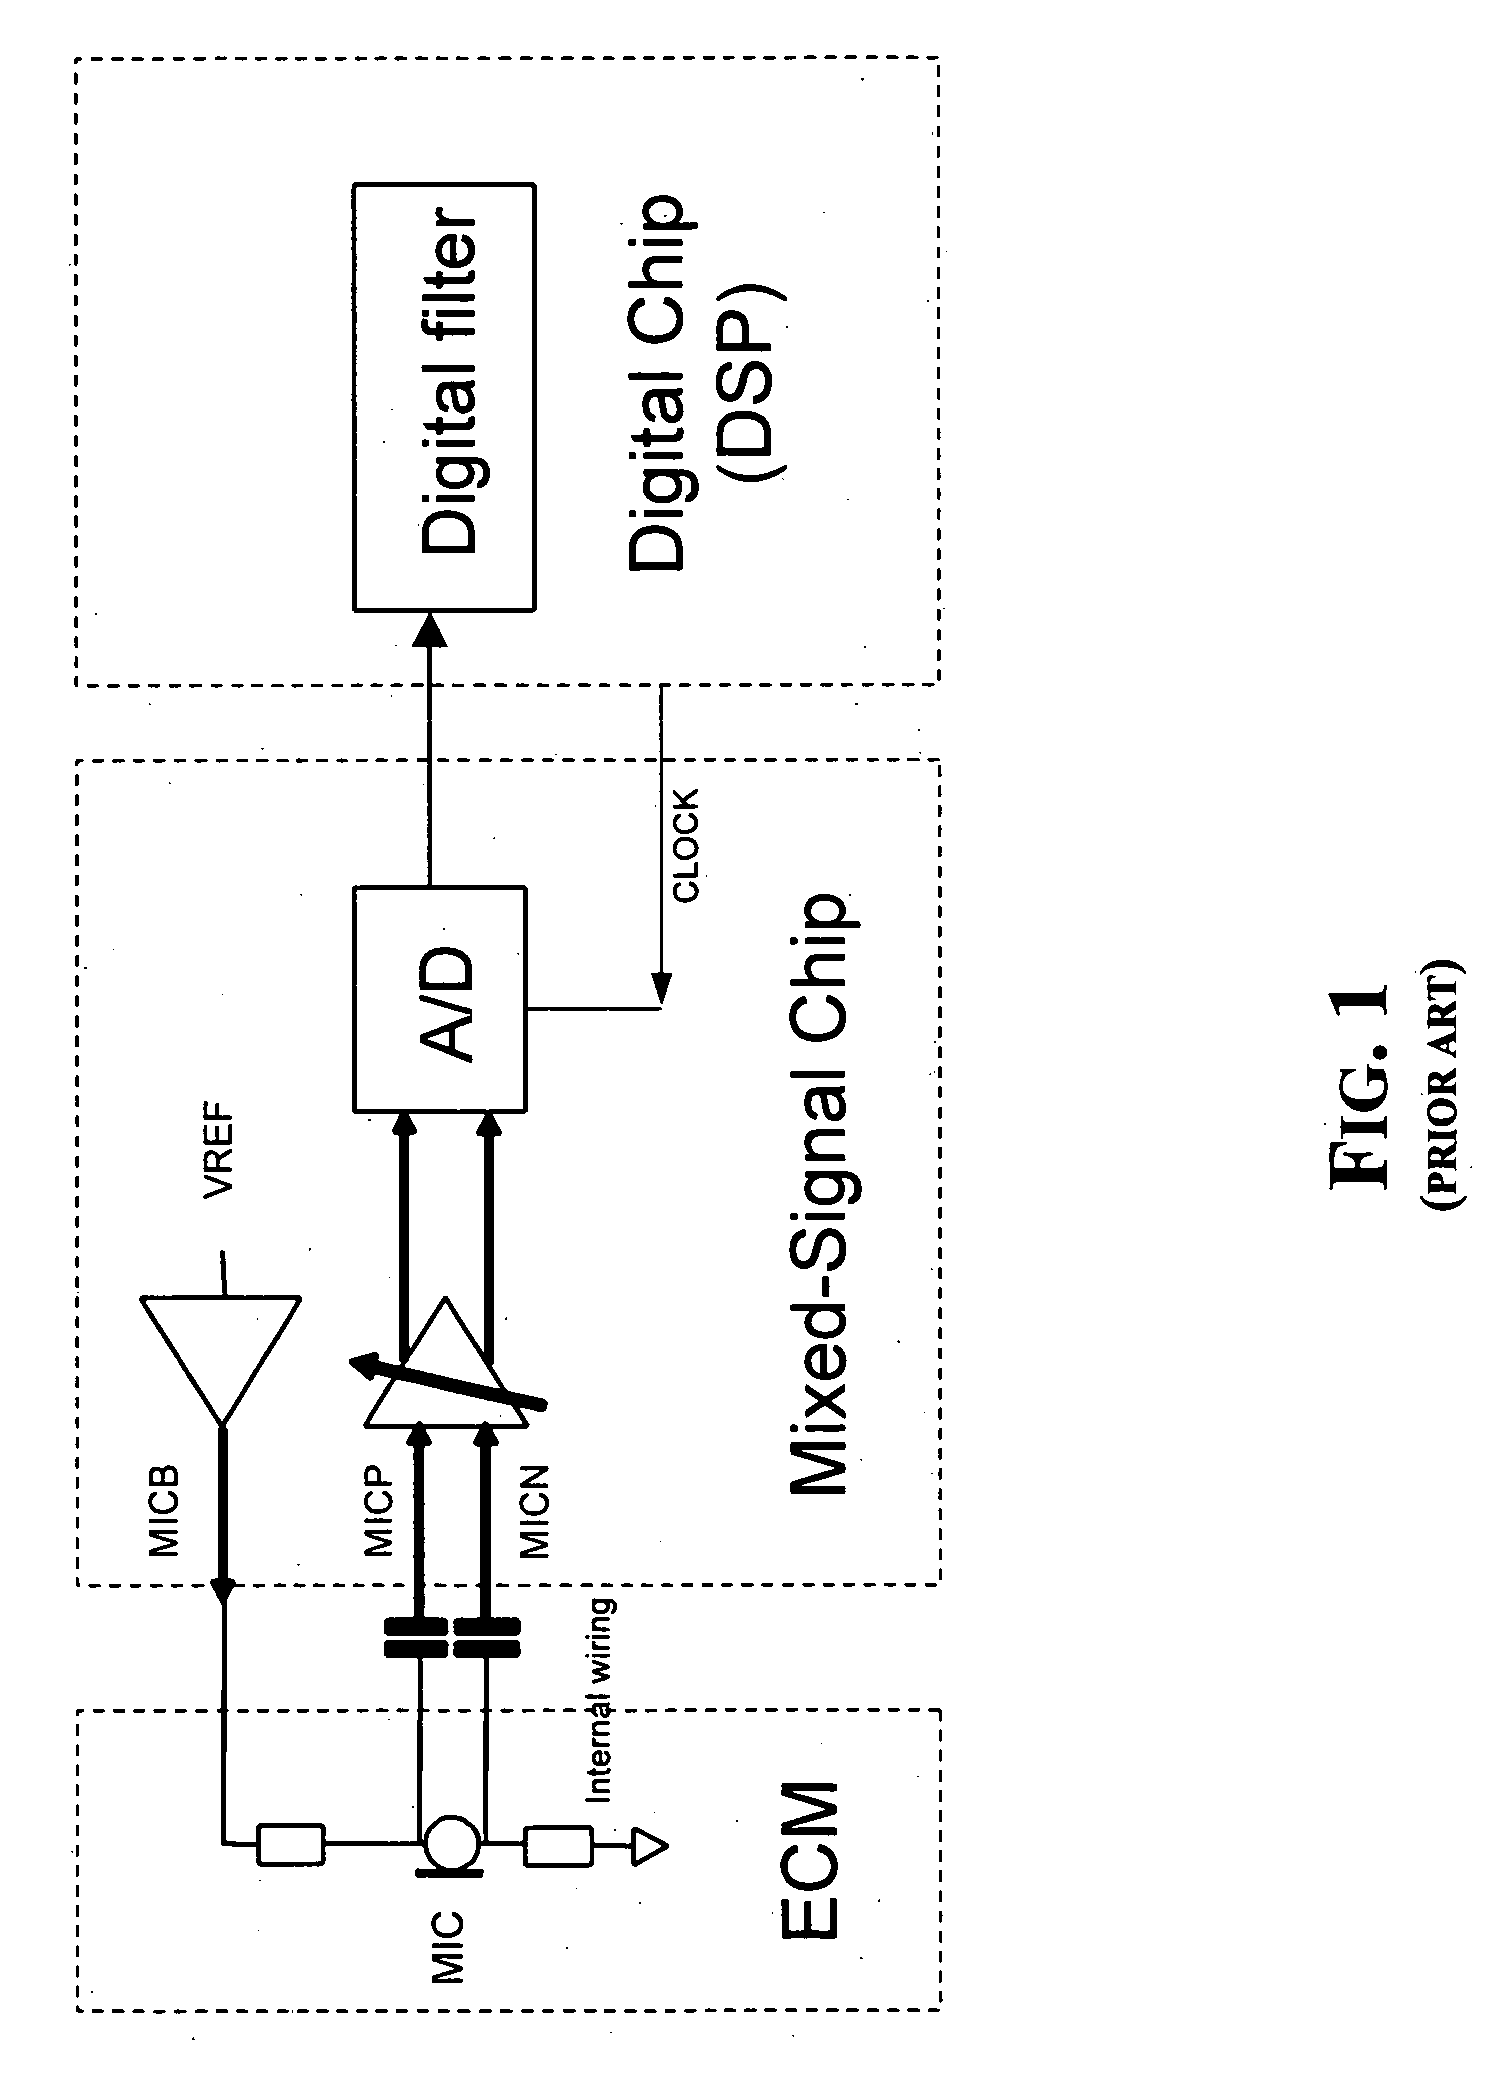 Packaged digital microphone device with auxiliary line-in function